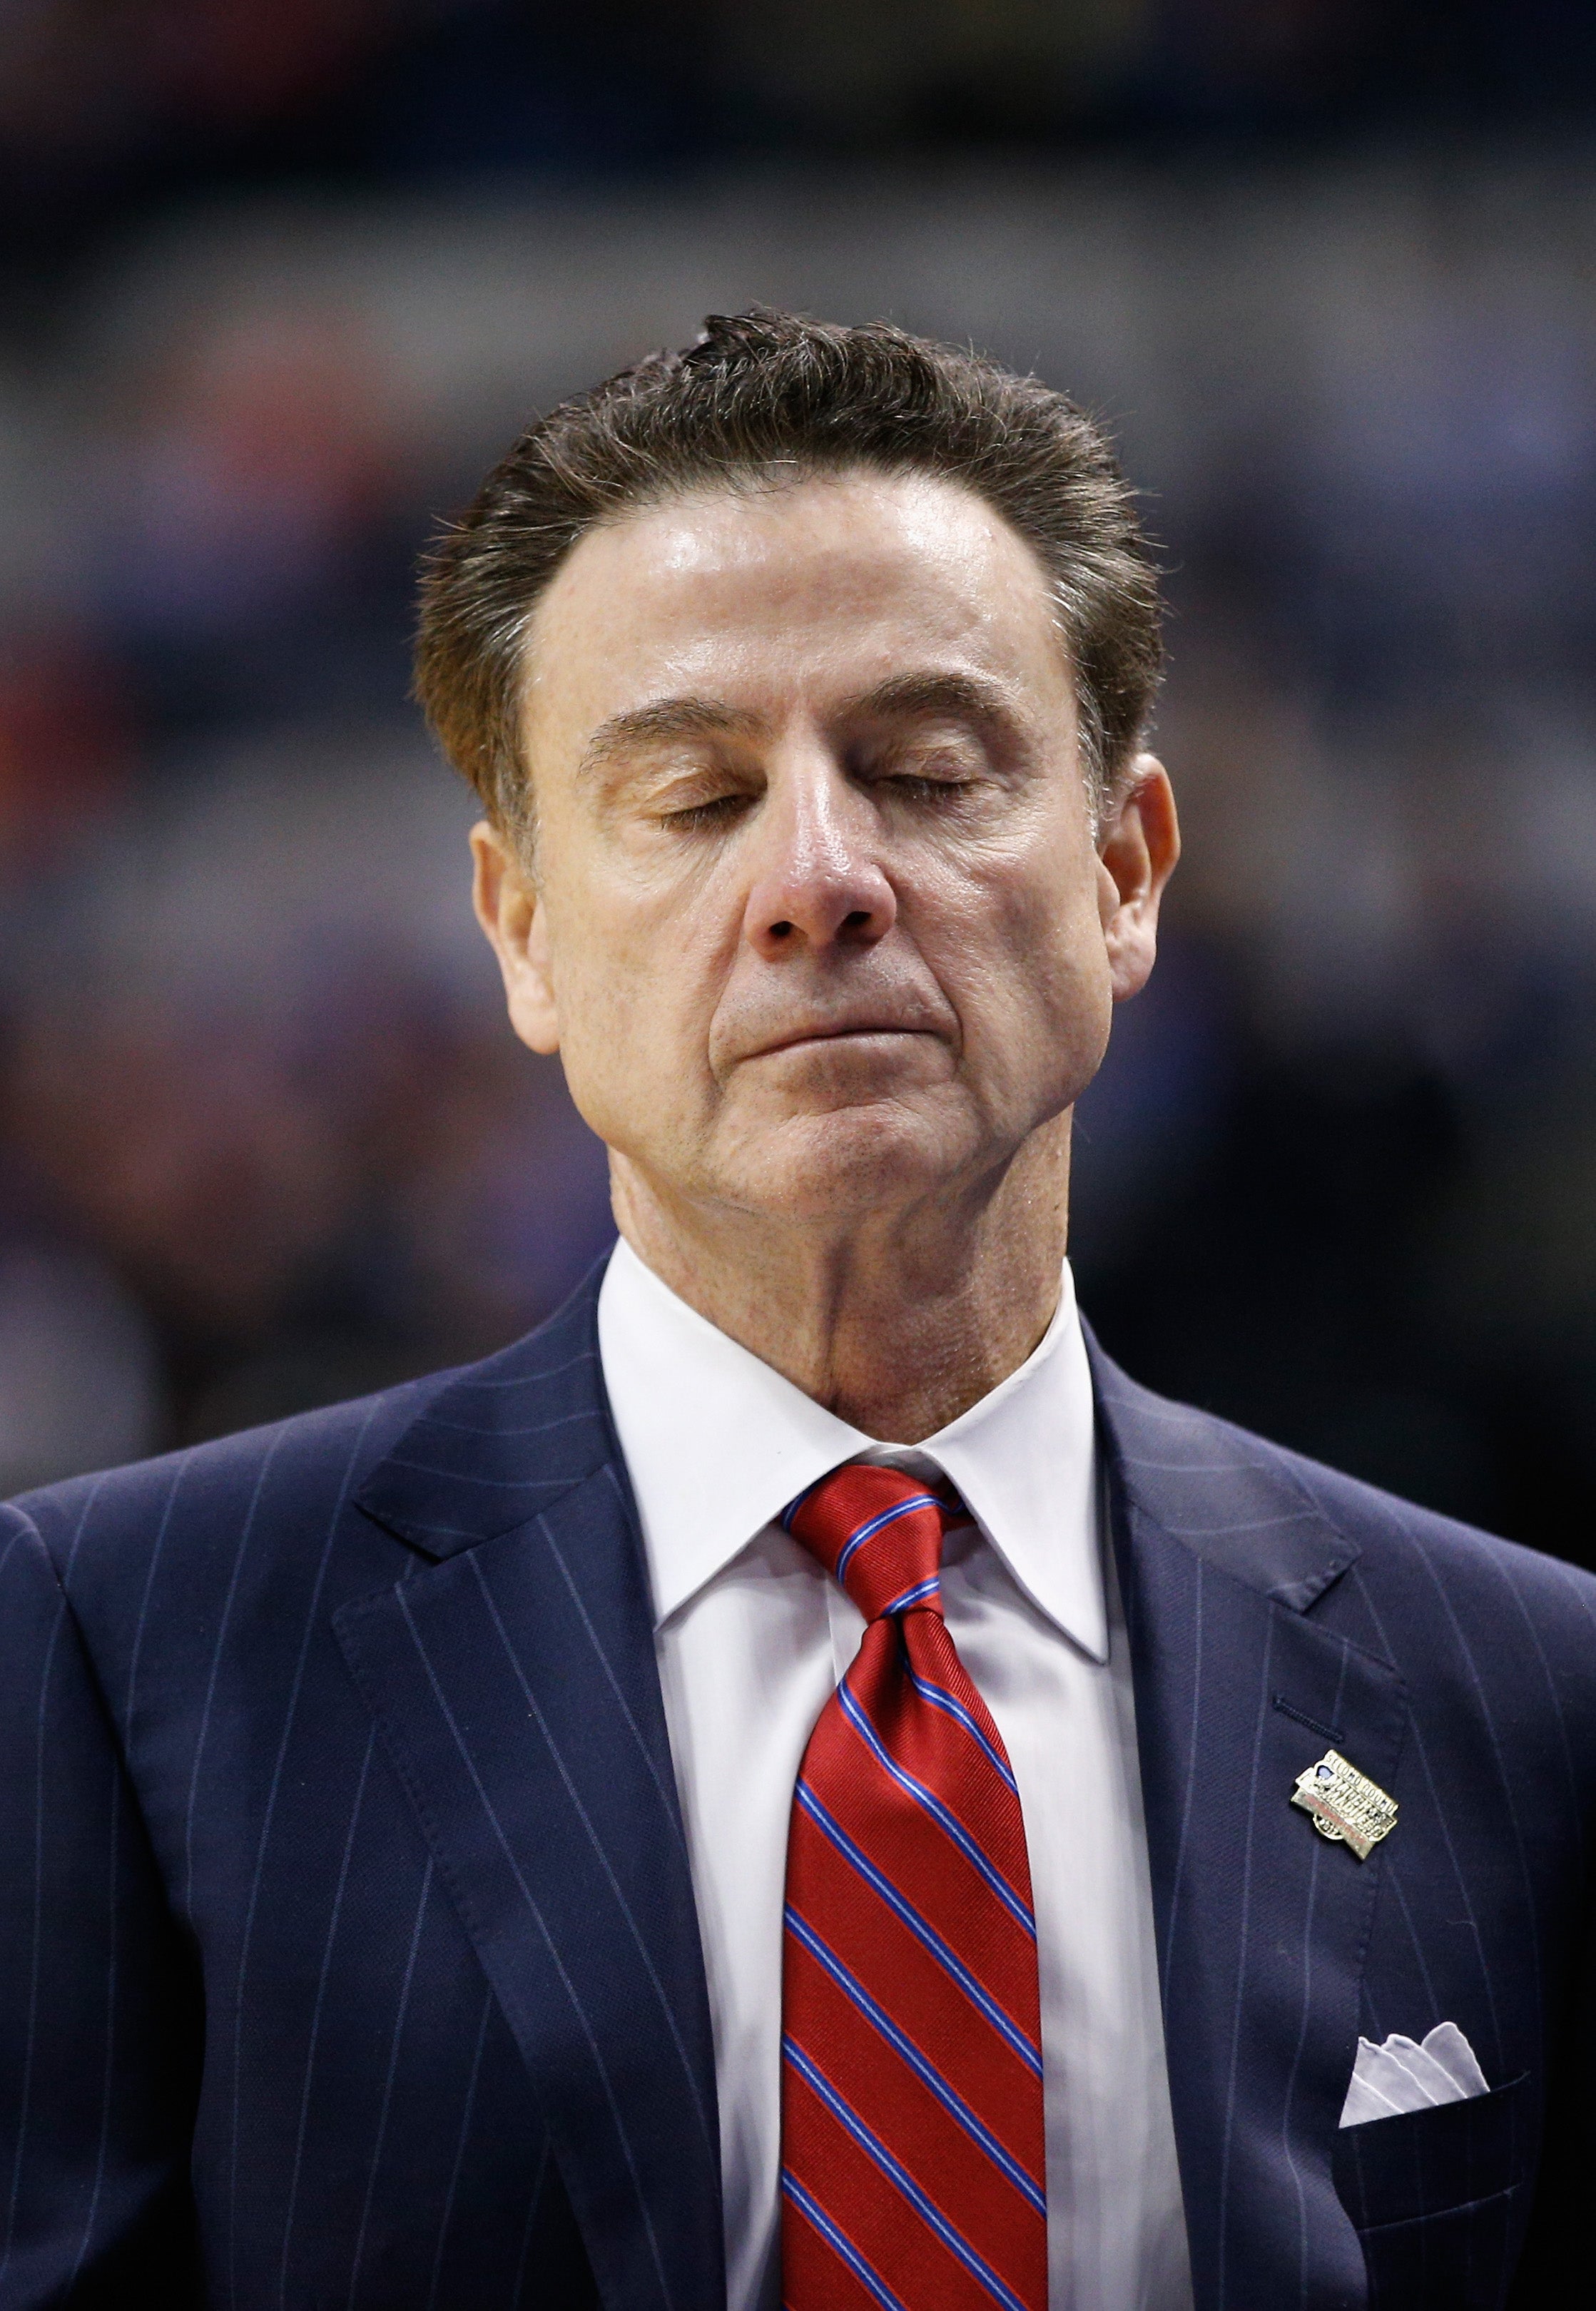 A College Sports Scandal So Big It Got Rick Pitino Fired! - The Rush Limbaugh Show